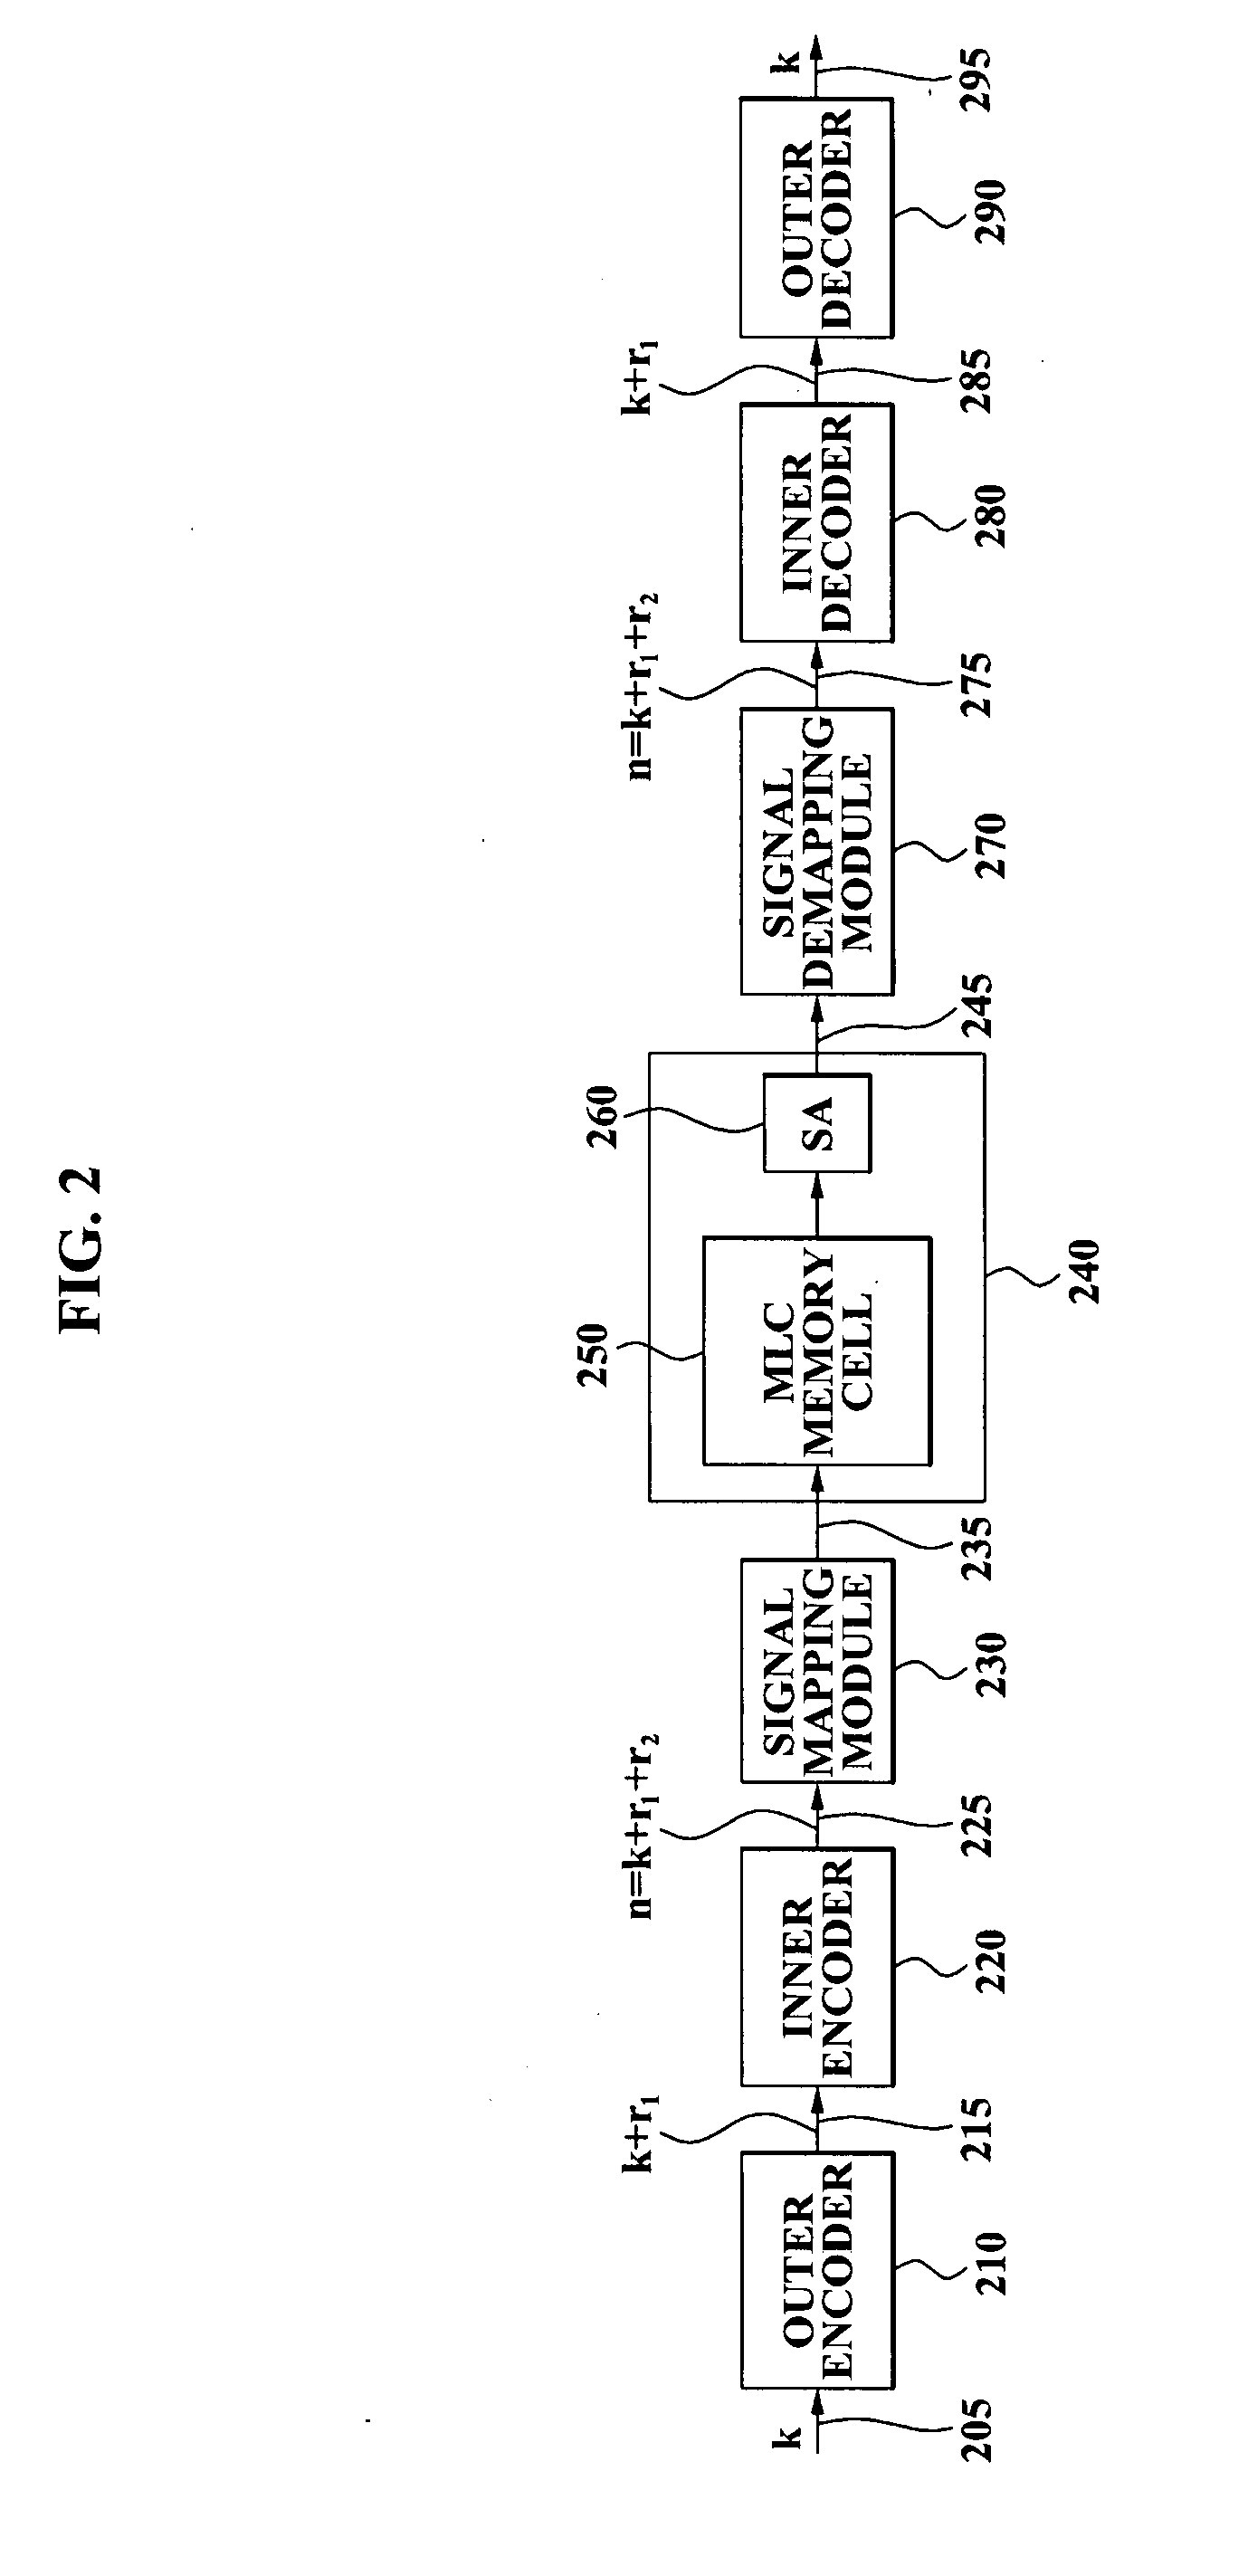 Multi-level cell memory device and method thereof